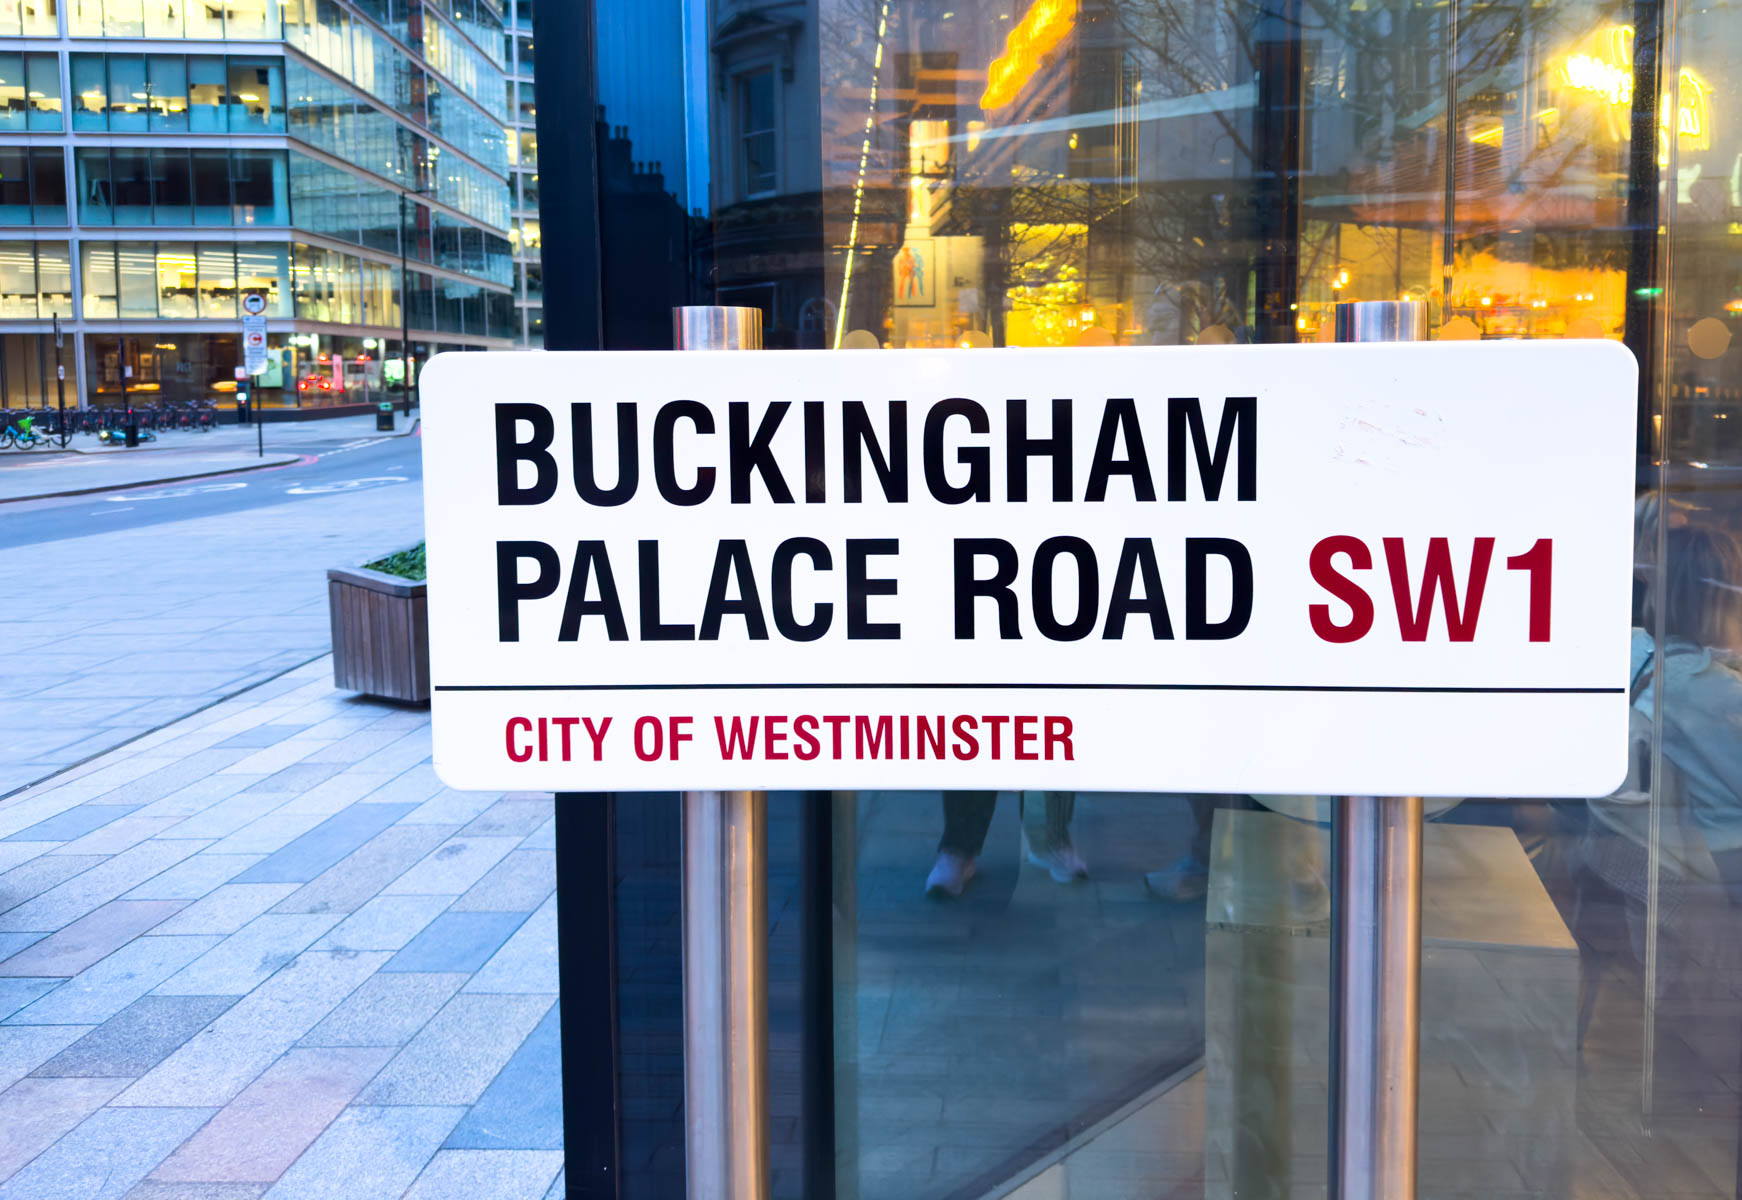 The sign for Buckingham Palace Road